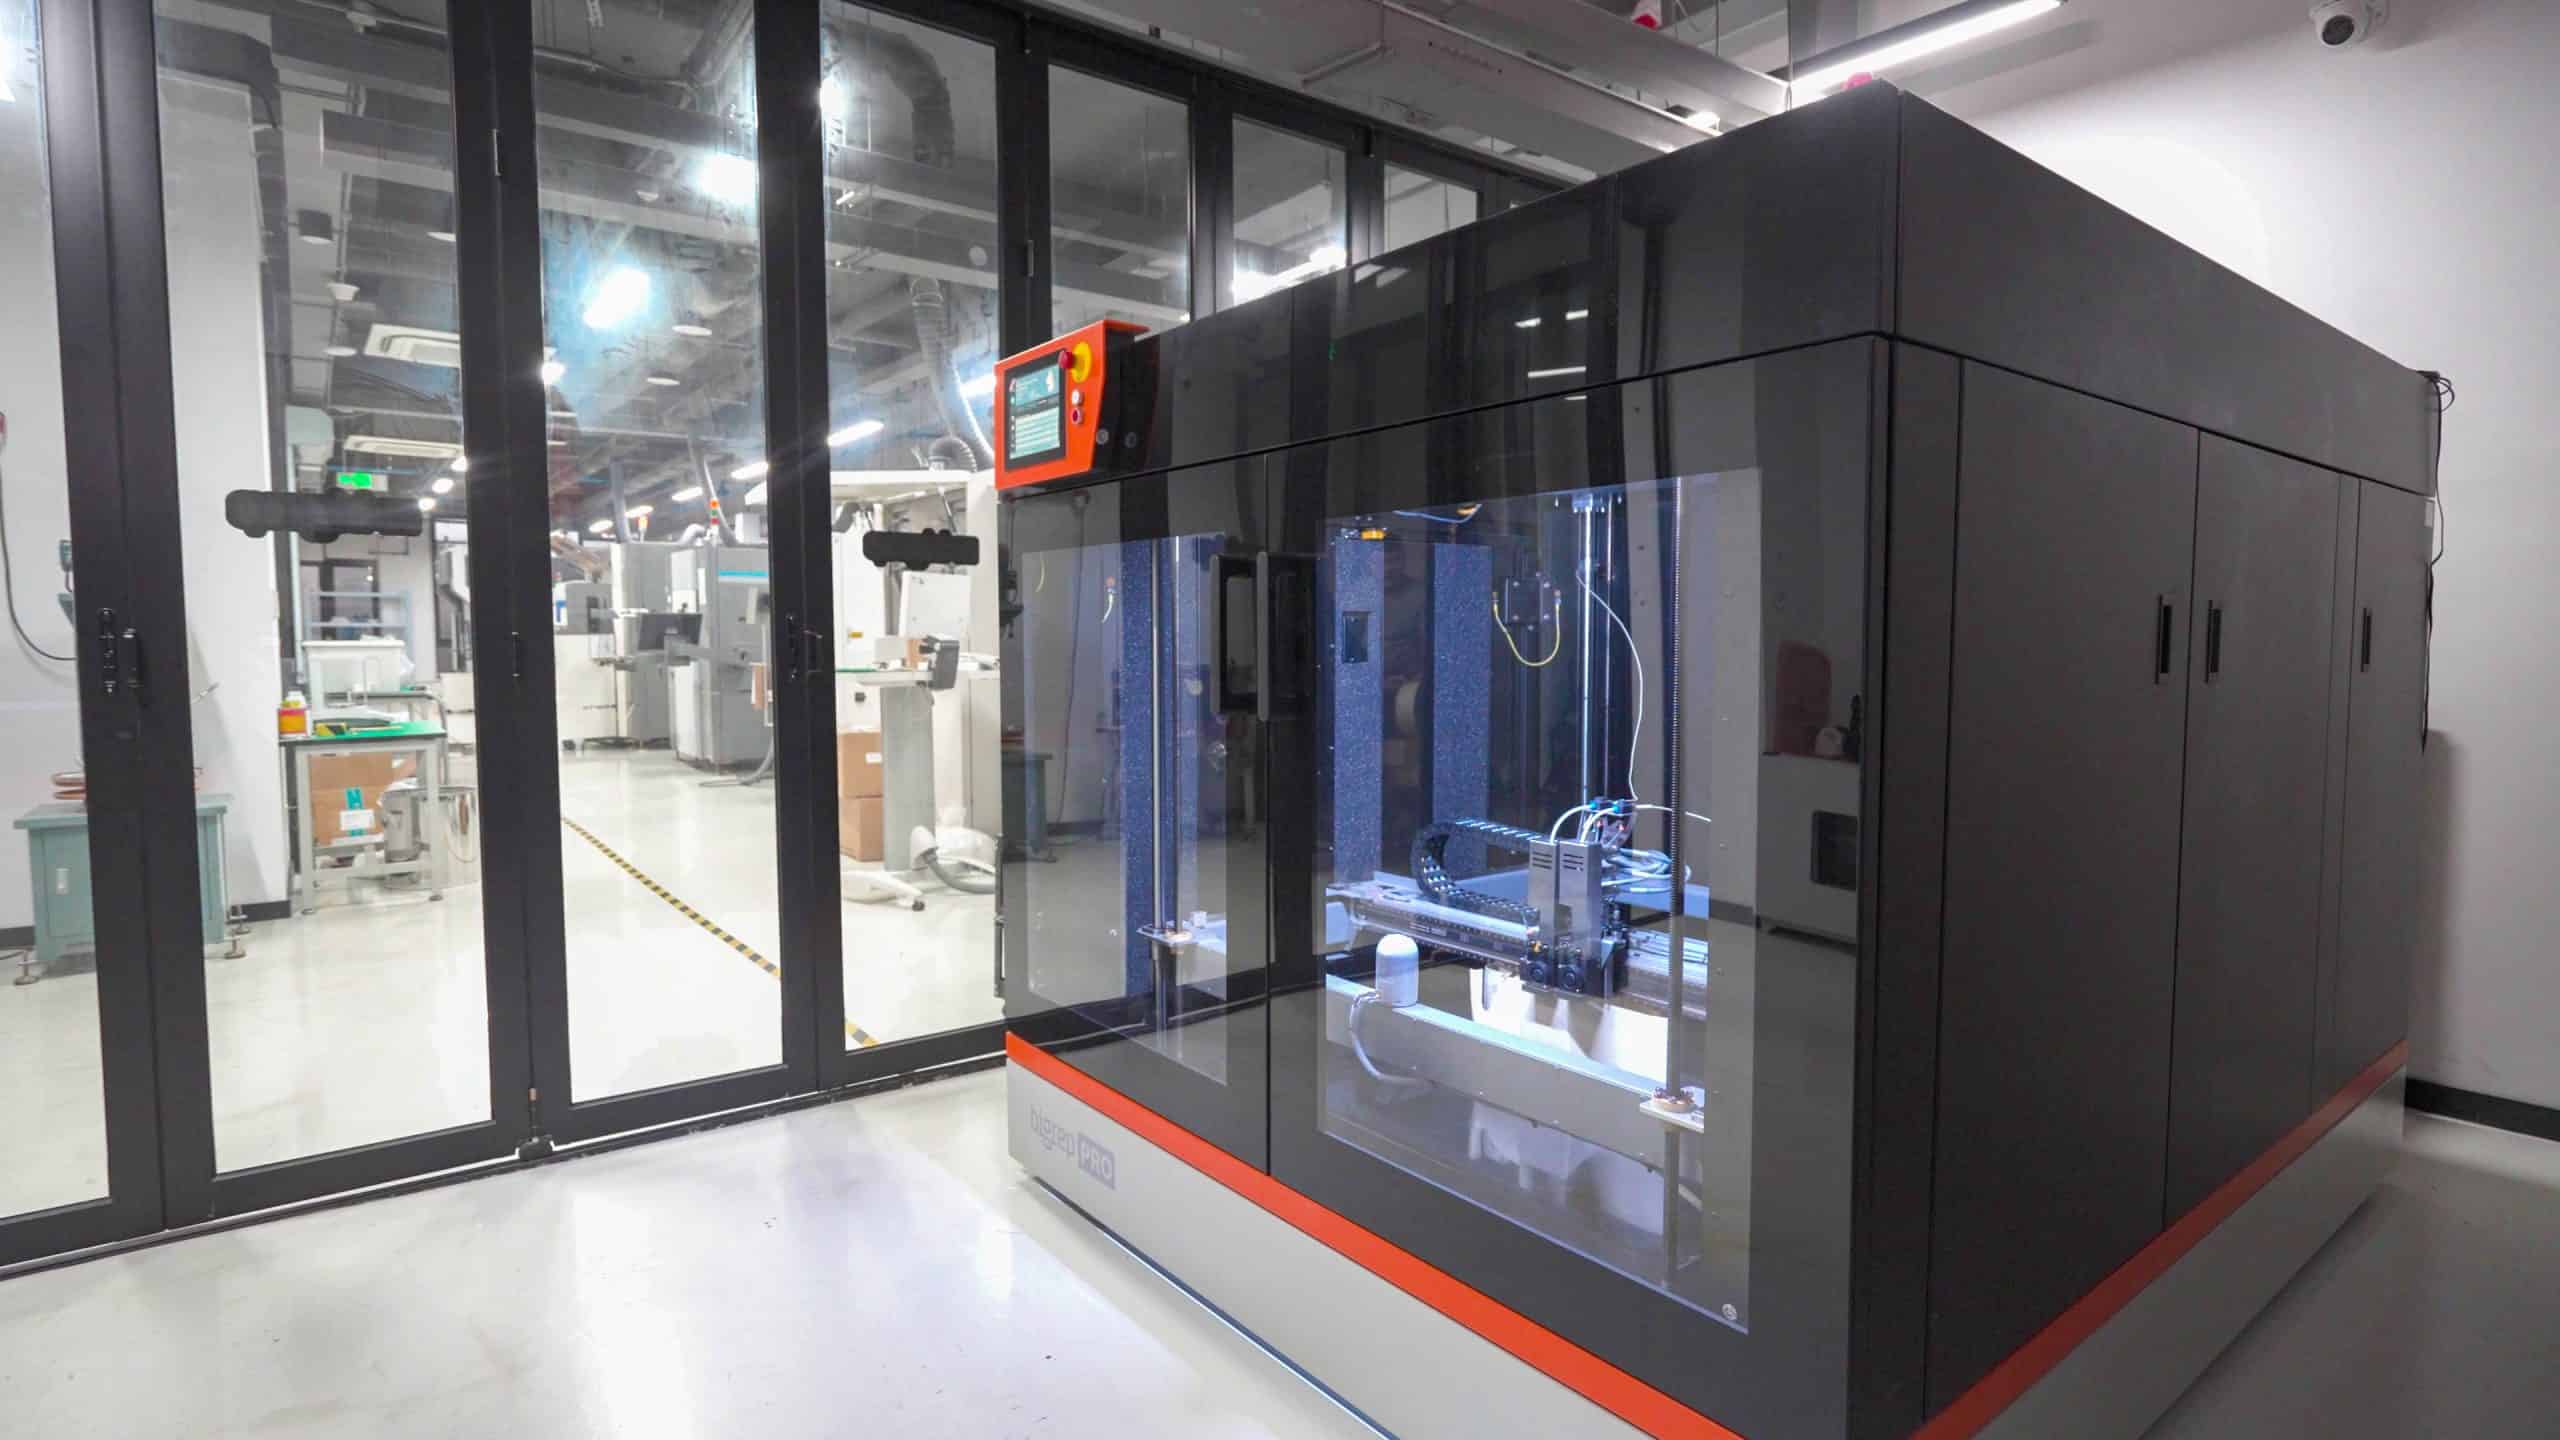 The BigRep PRO at the 3D printing CNHTC center